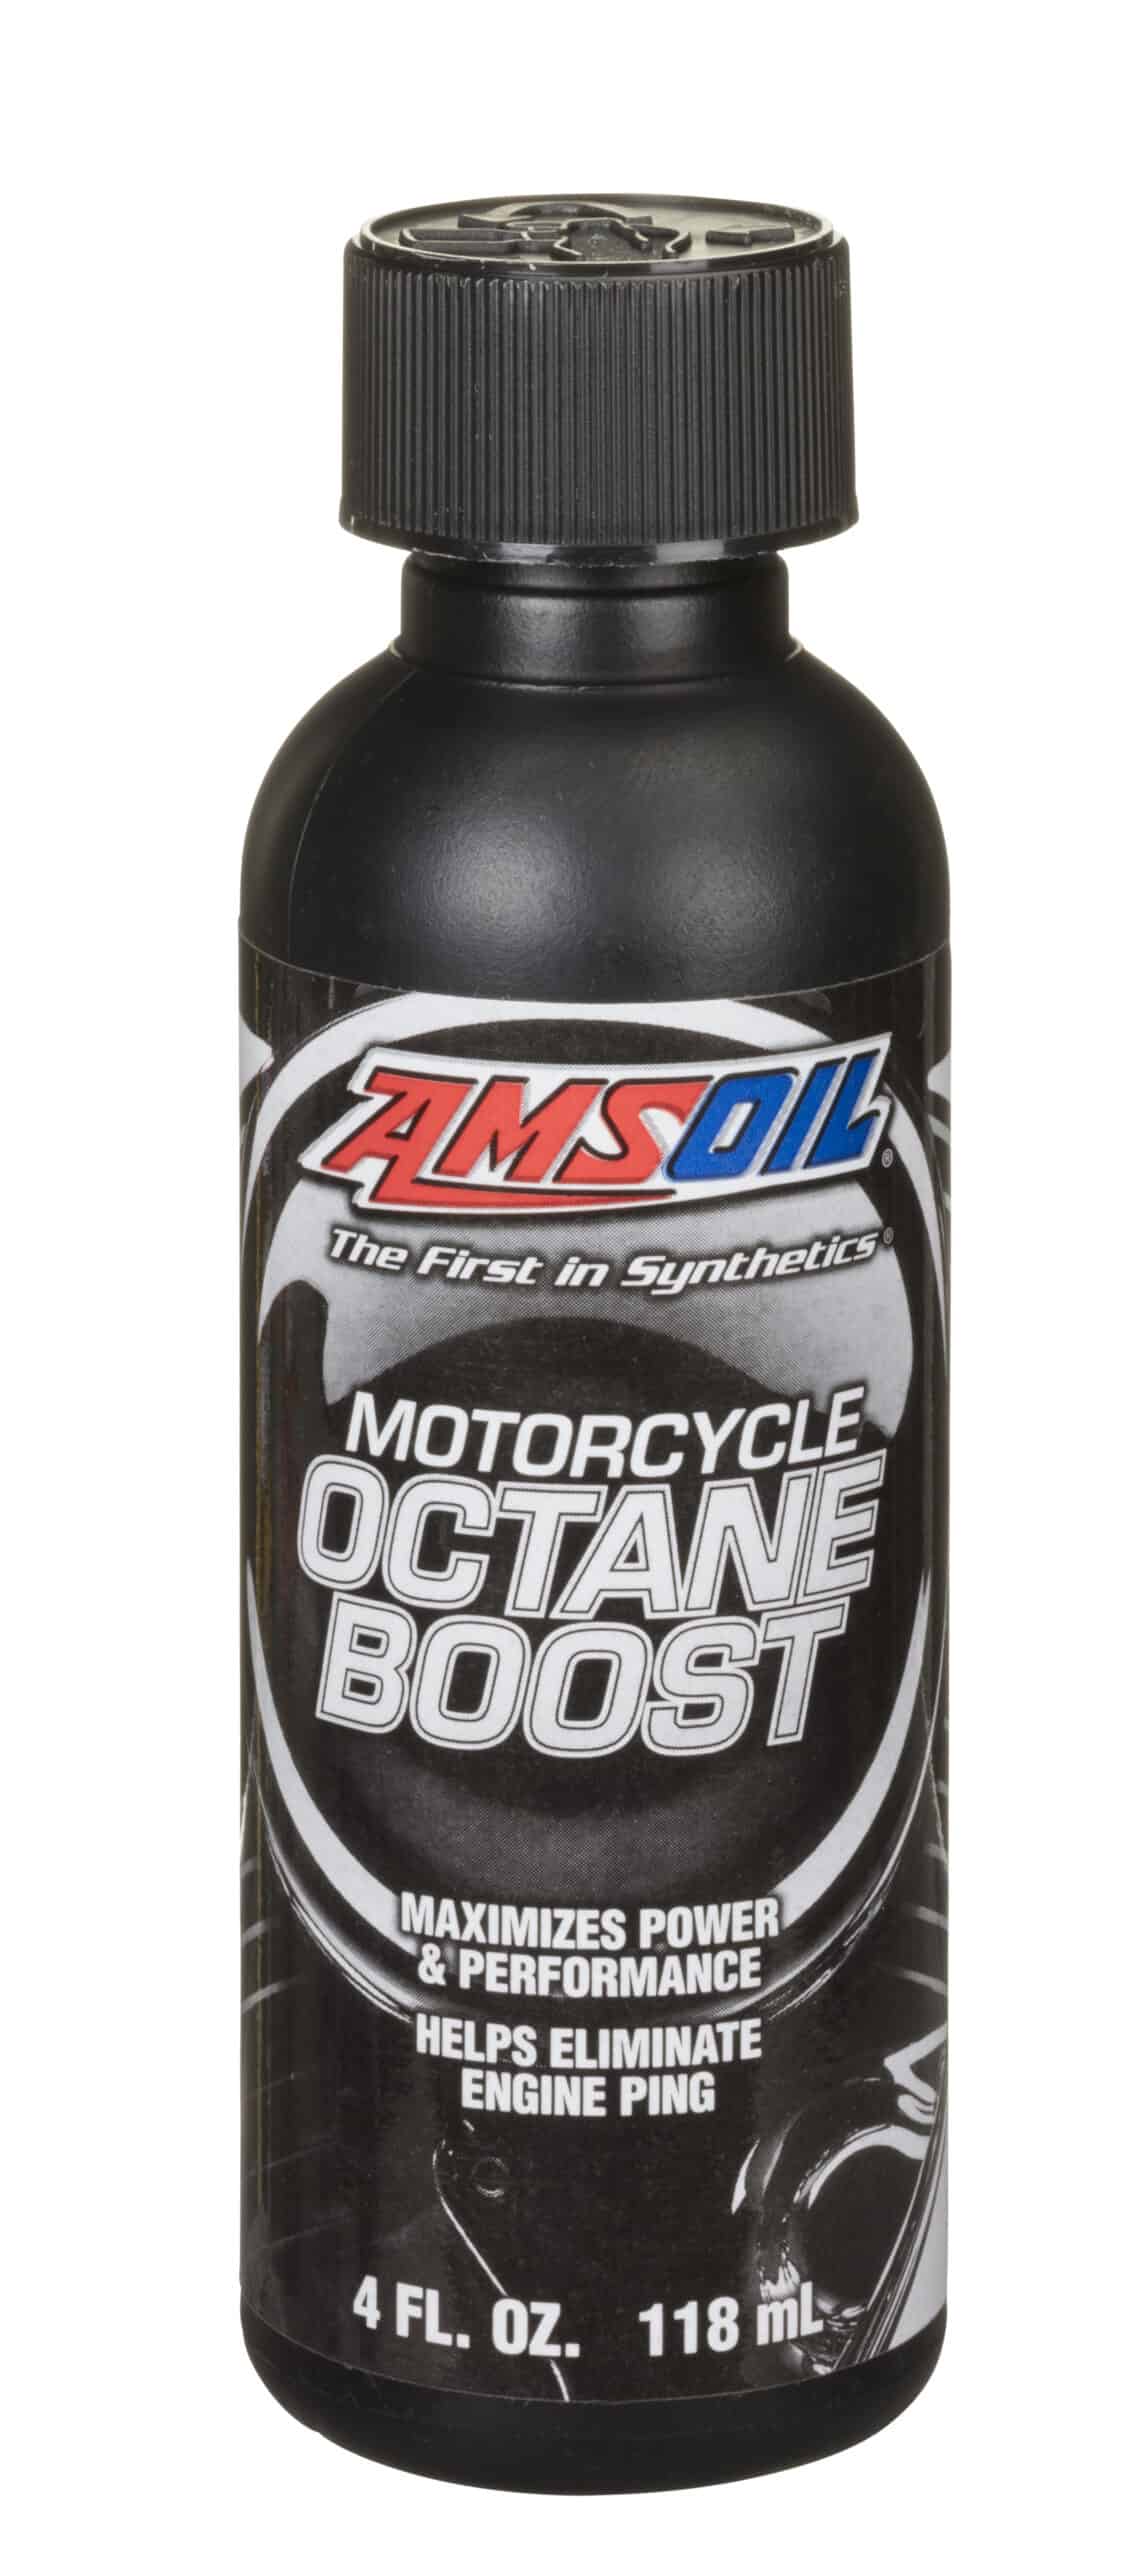 Motorcycle Octane Boost MOBCN scaled